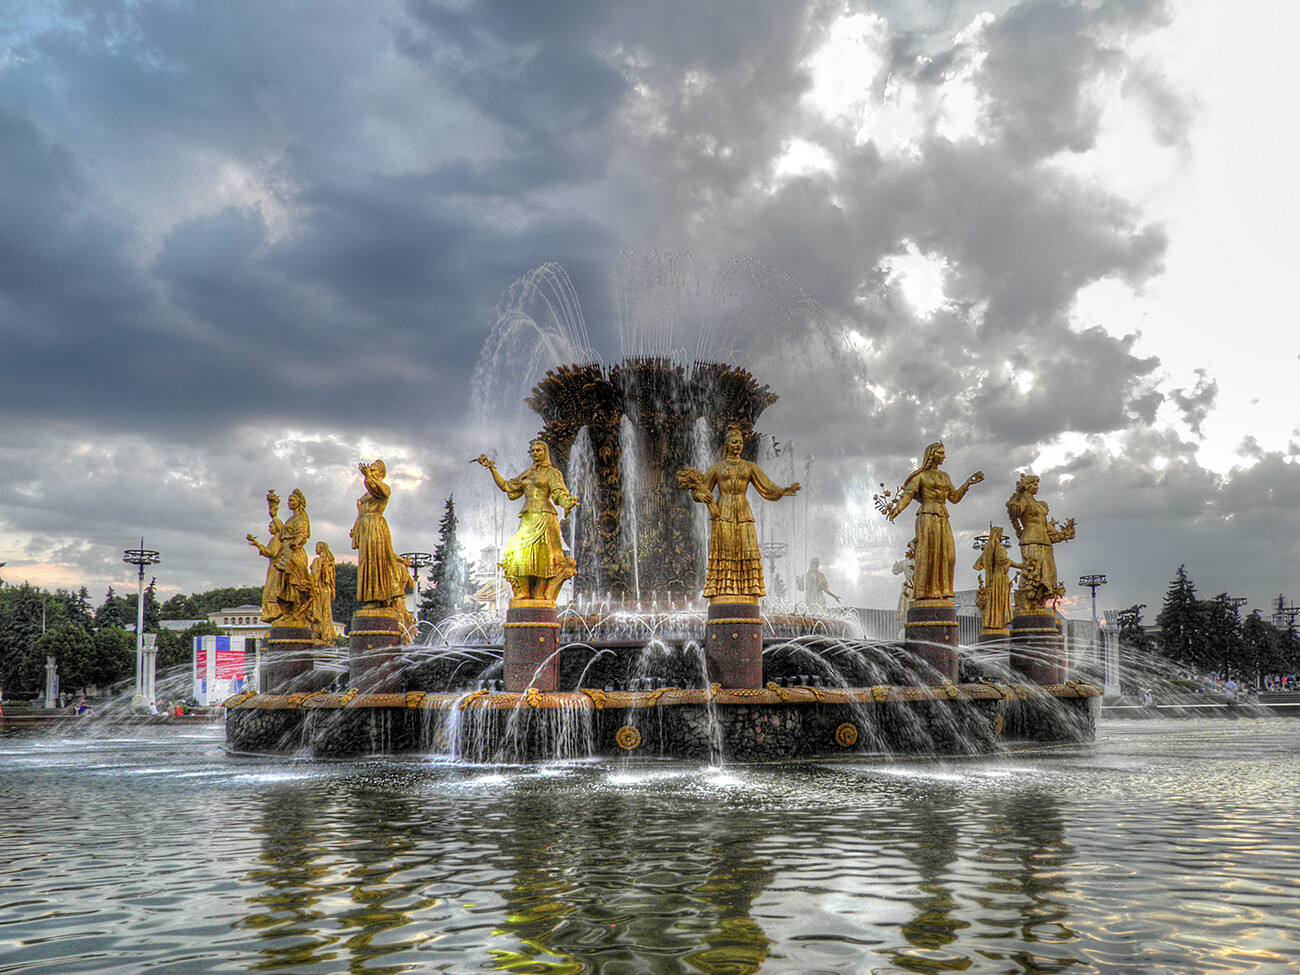 Friendship of the People's' Fountain at VDNKh